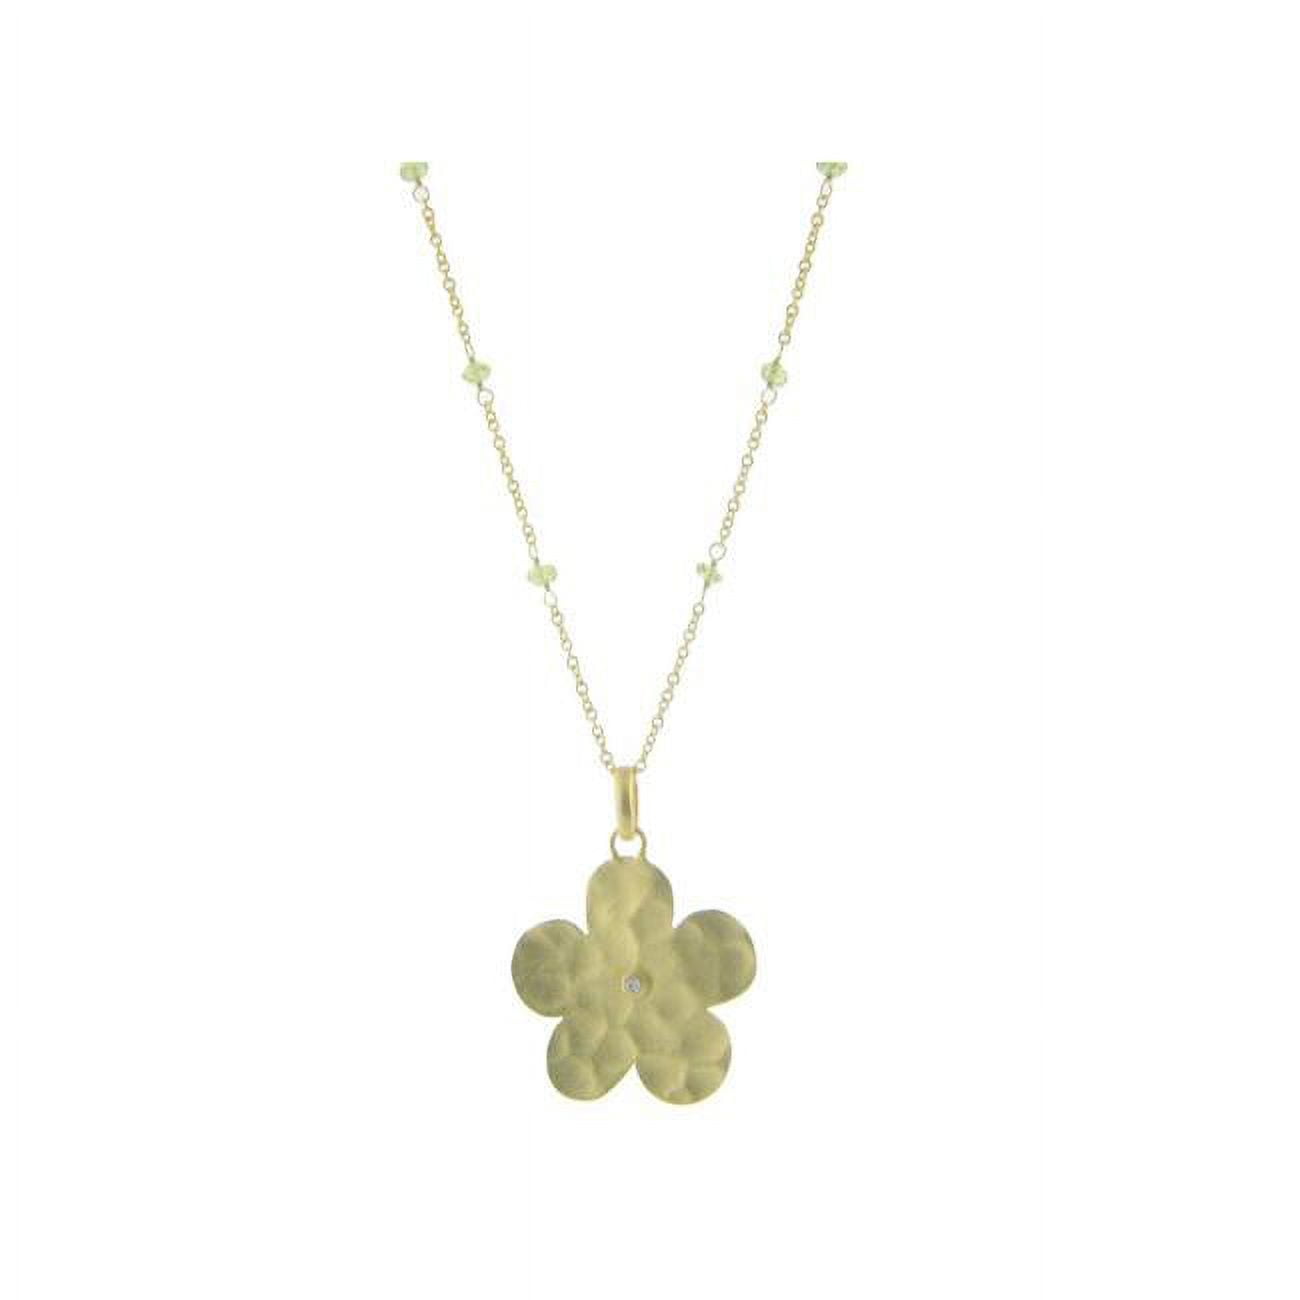 211362g 16 In. Hammered Gold Plated Sterling Silver Flower Of Life & Peridot Stone Necklace